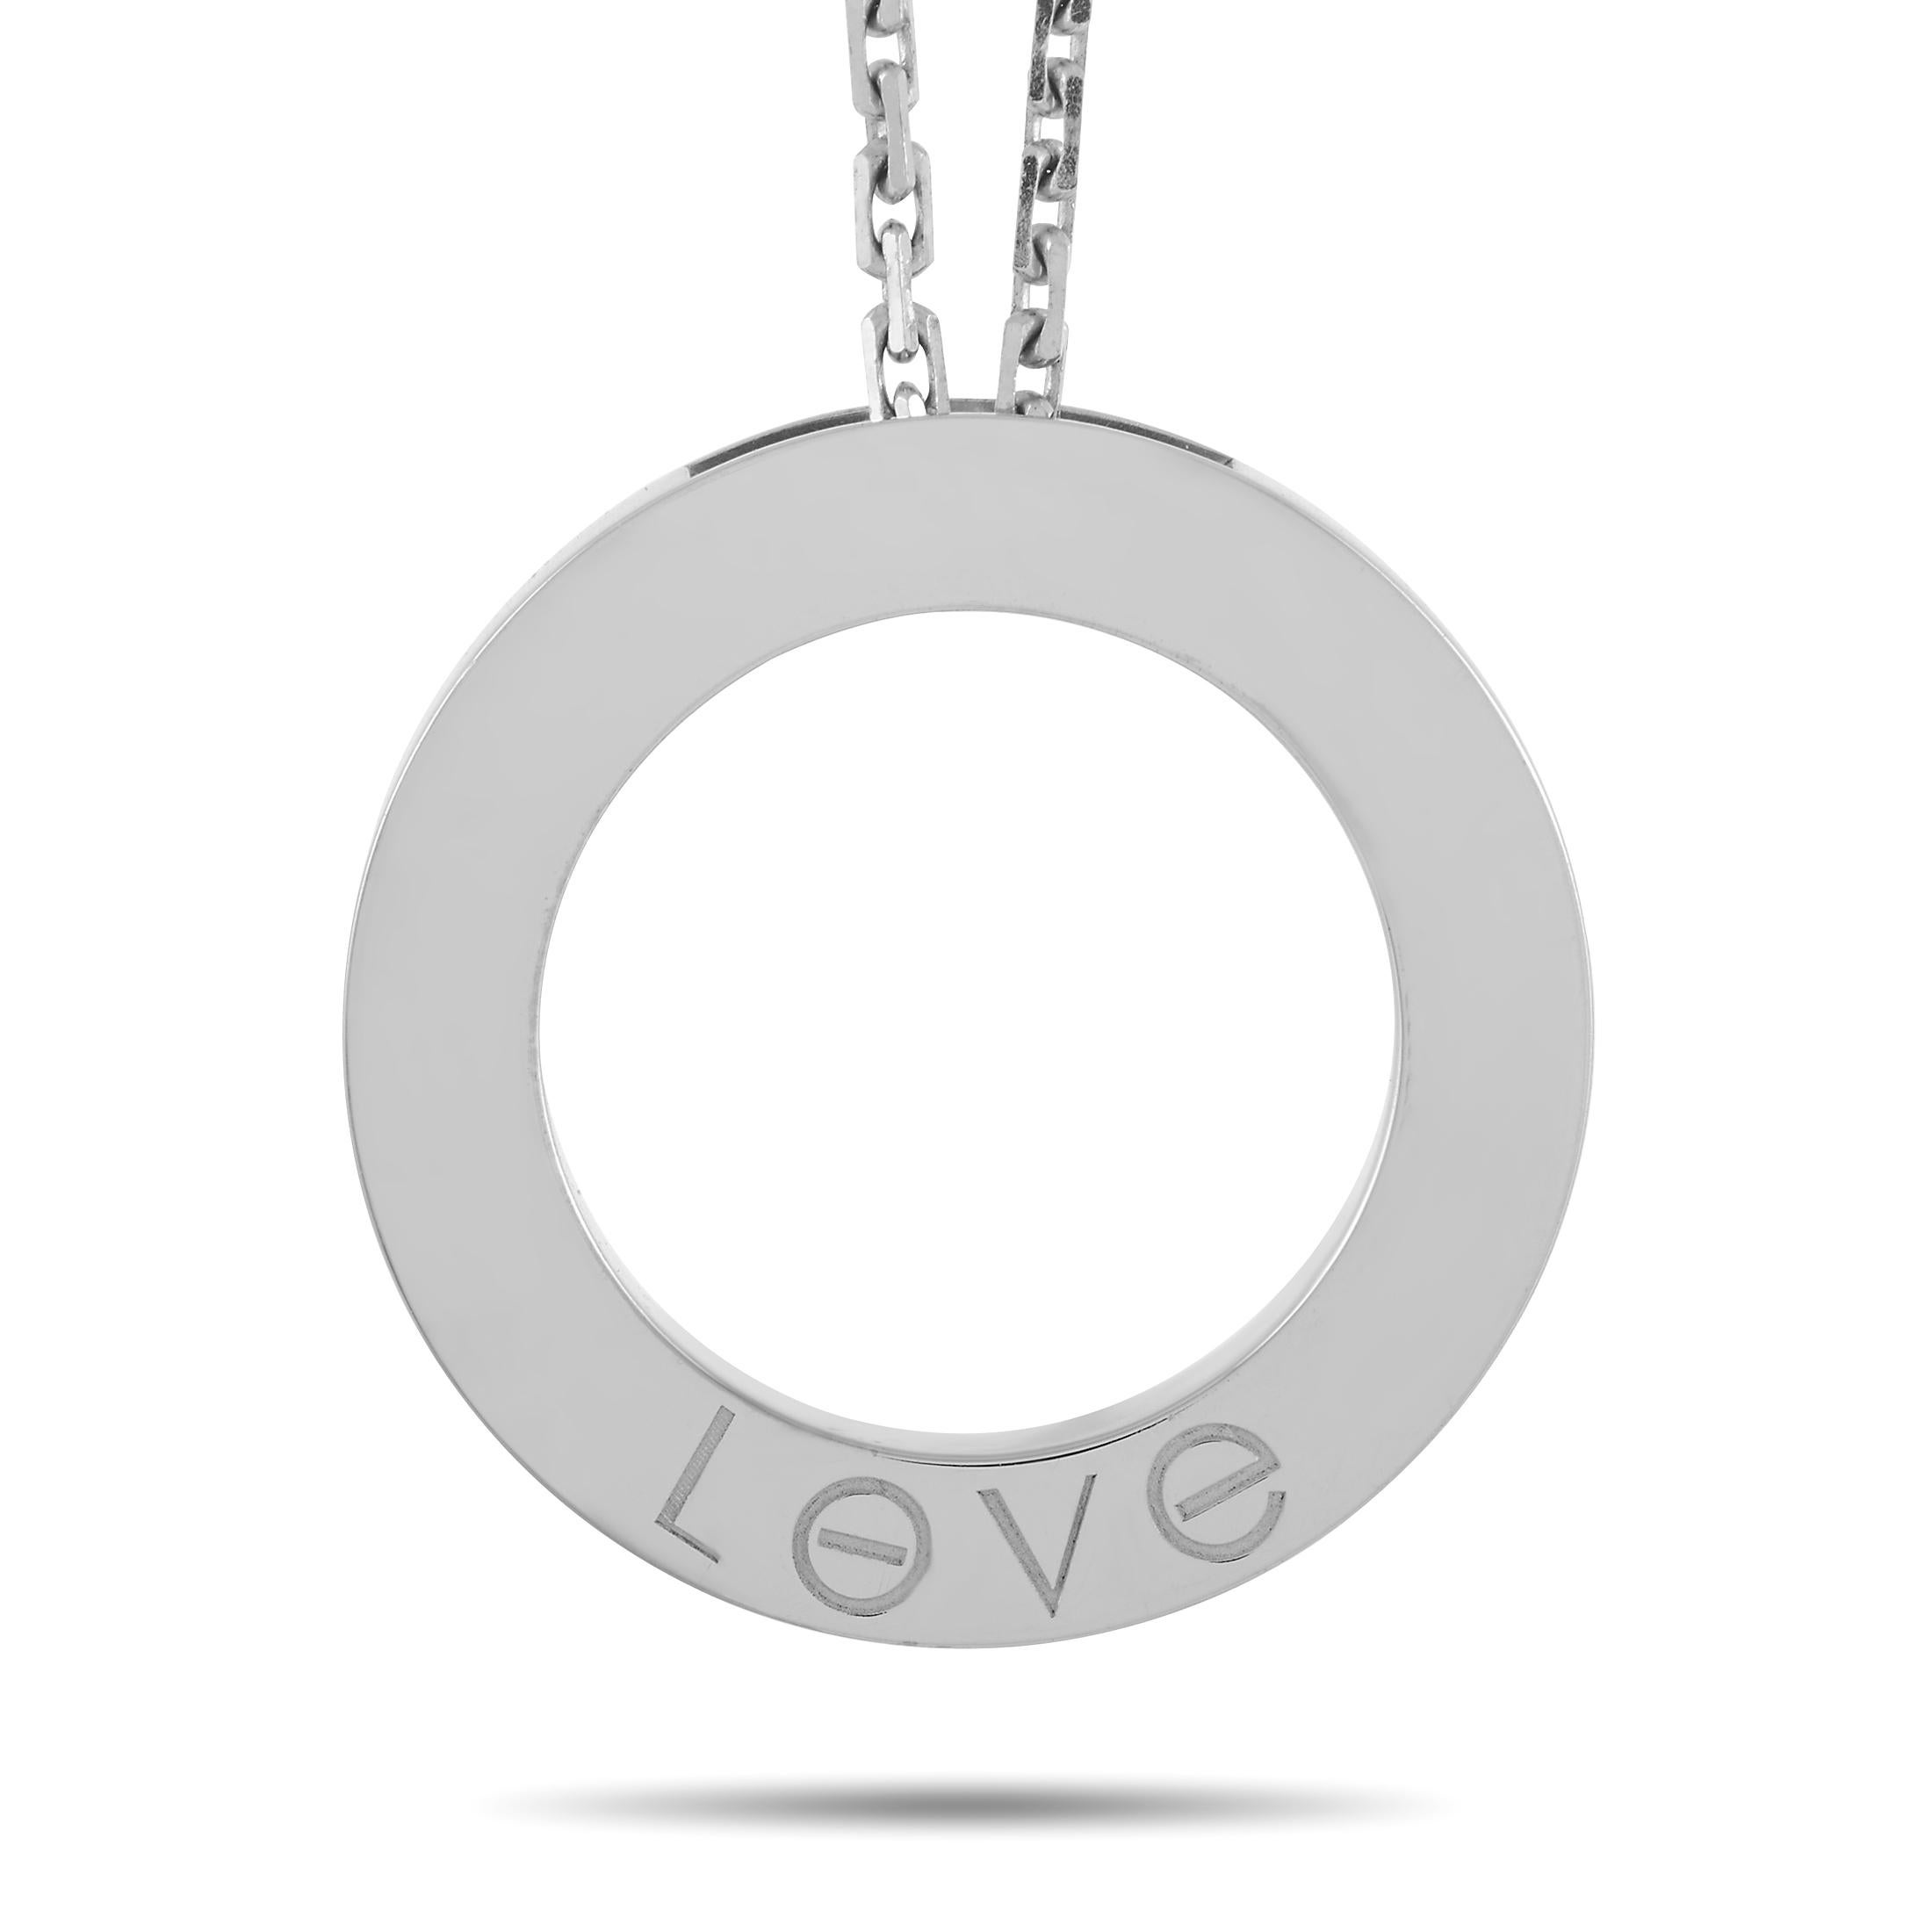 It doesn’t get any more iconic than this chic pendant necklace from Cartier’s popular Love collection. Attached to a 16” chain, you’ll find a circular pendant measuring .88” round crafted from opulent 18K White Gold. It’s accented by the brand’s